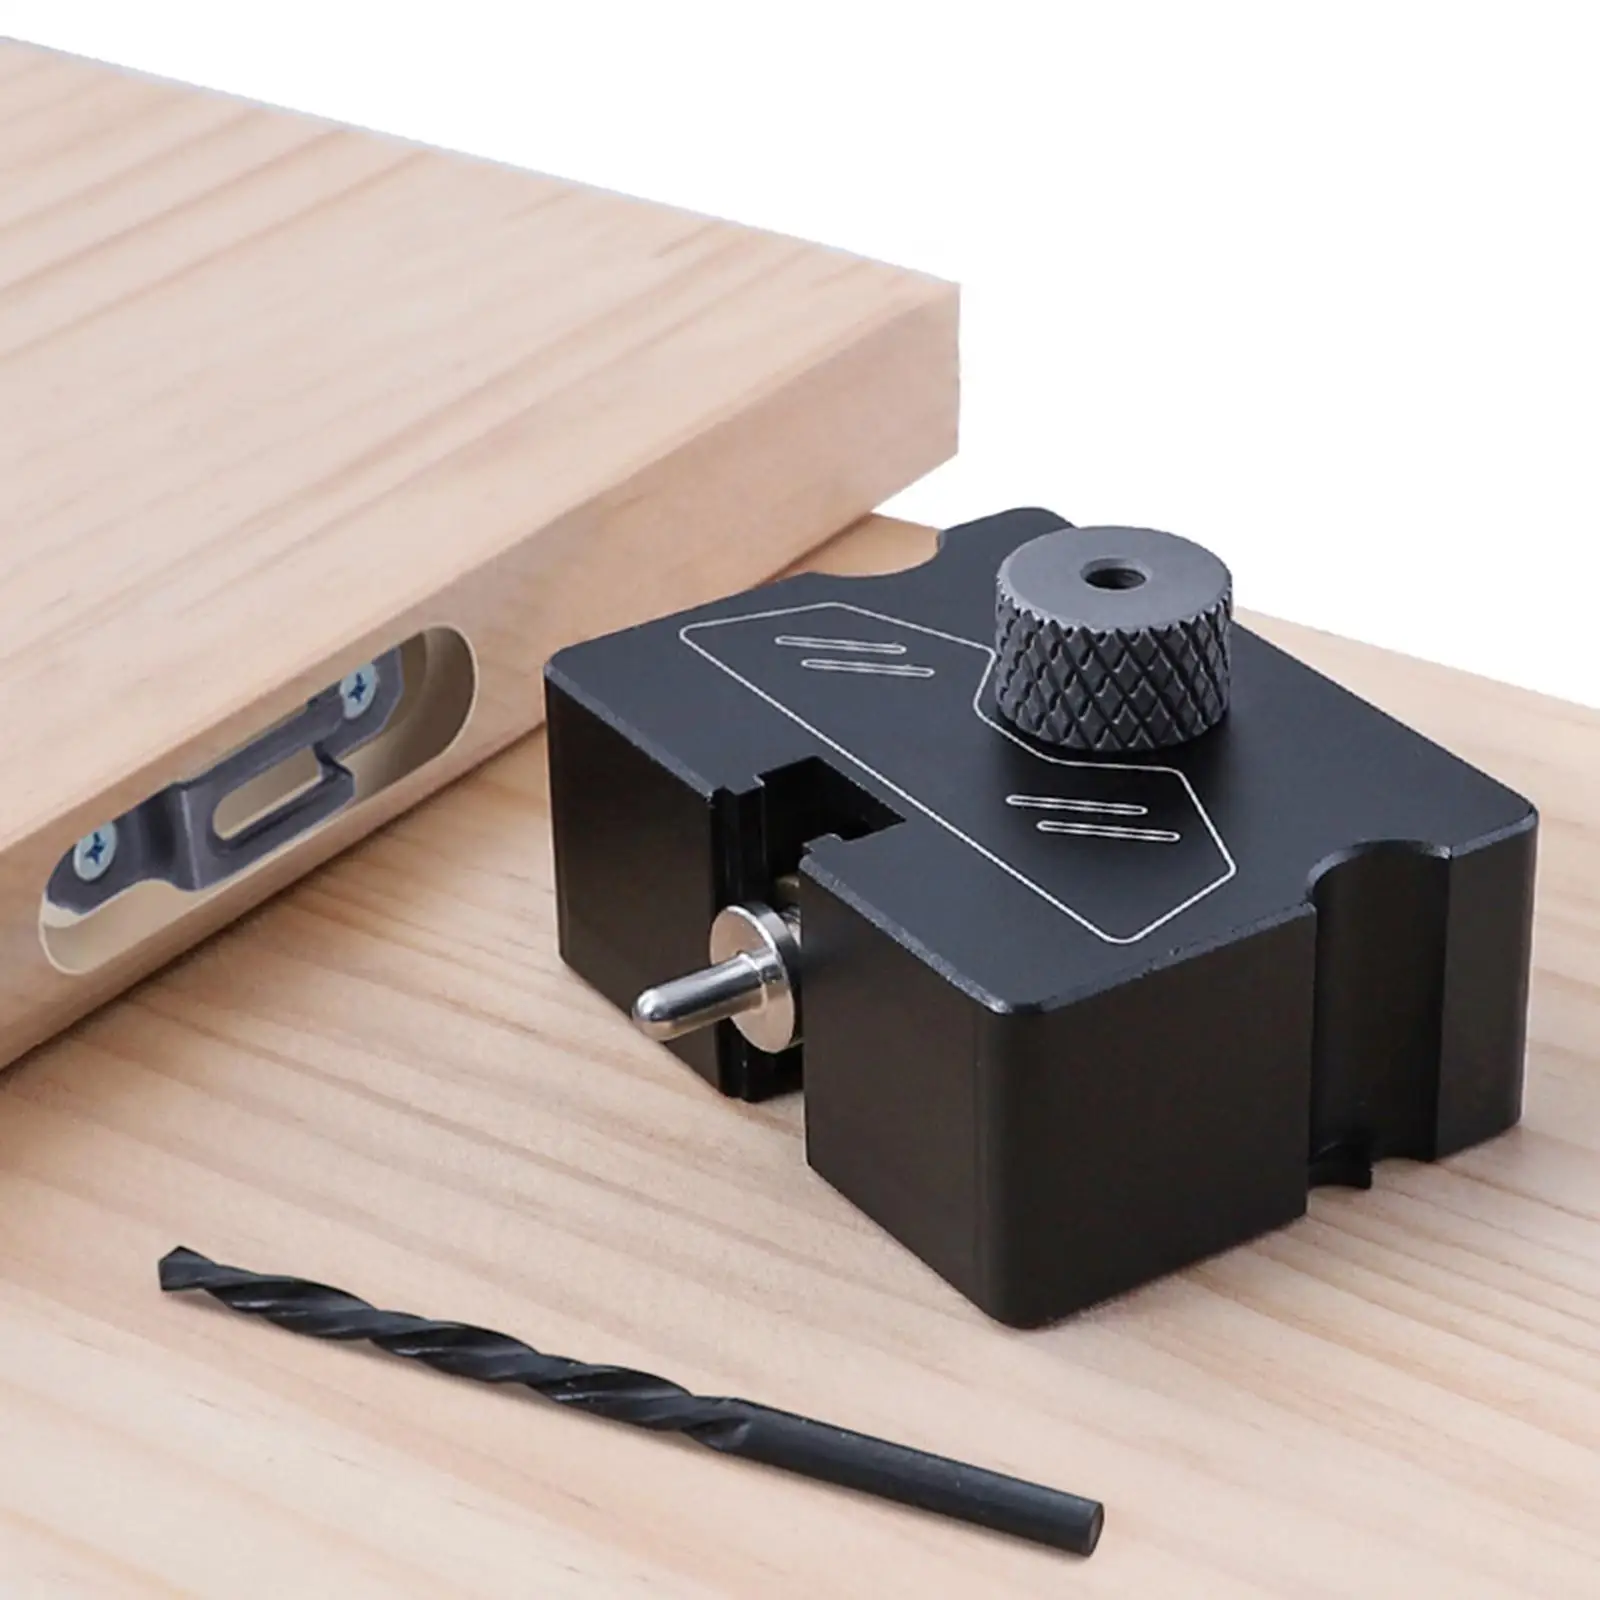 Pocket Hole Jig Kit Positioning Punch Tools Positioning Hole Puncher for Carpentry Woodworking